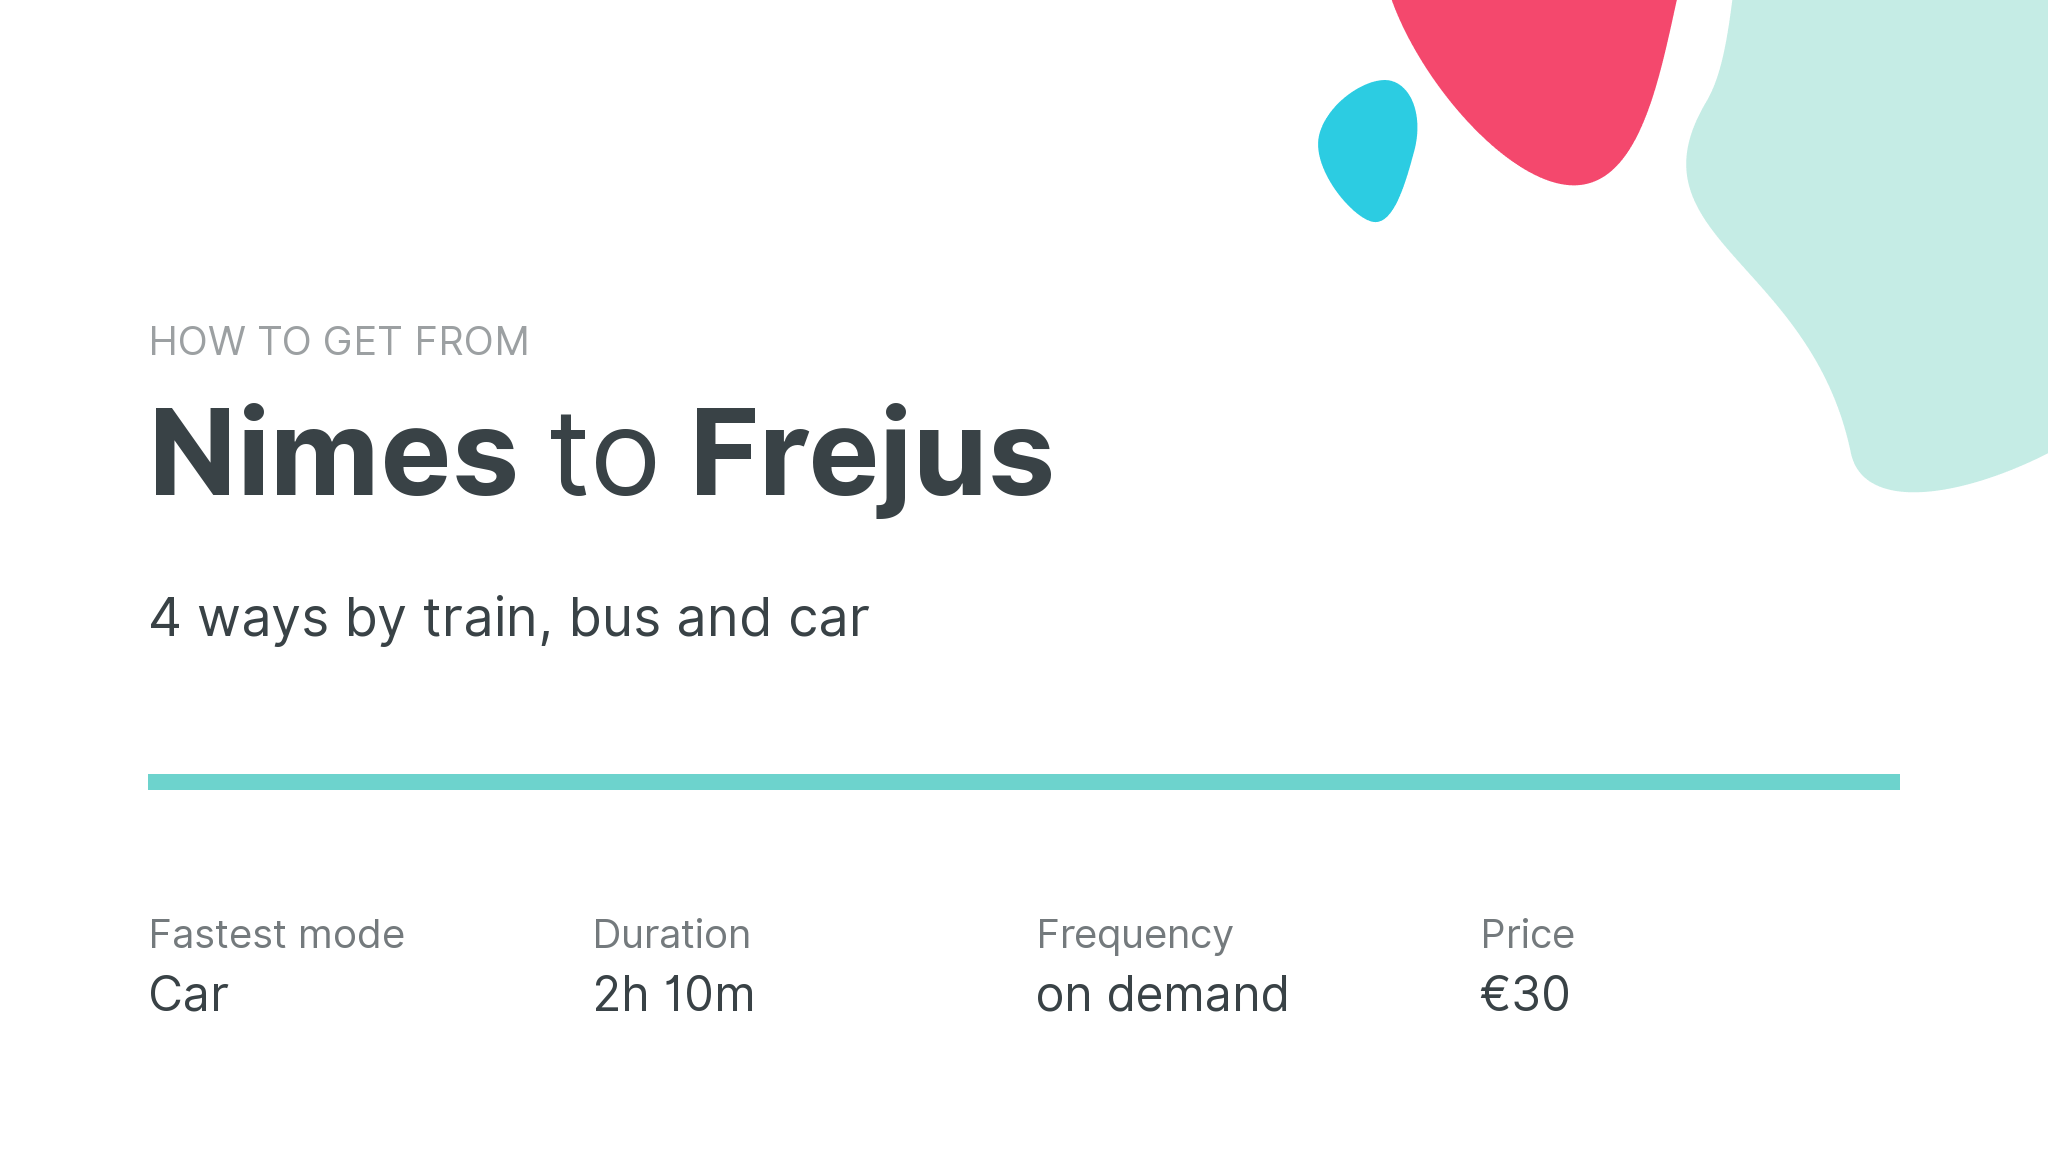 How do I get from Nimes to Frejus